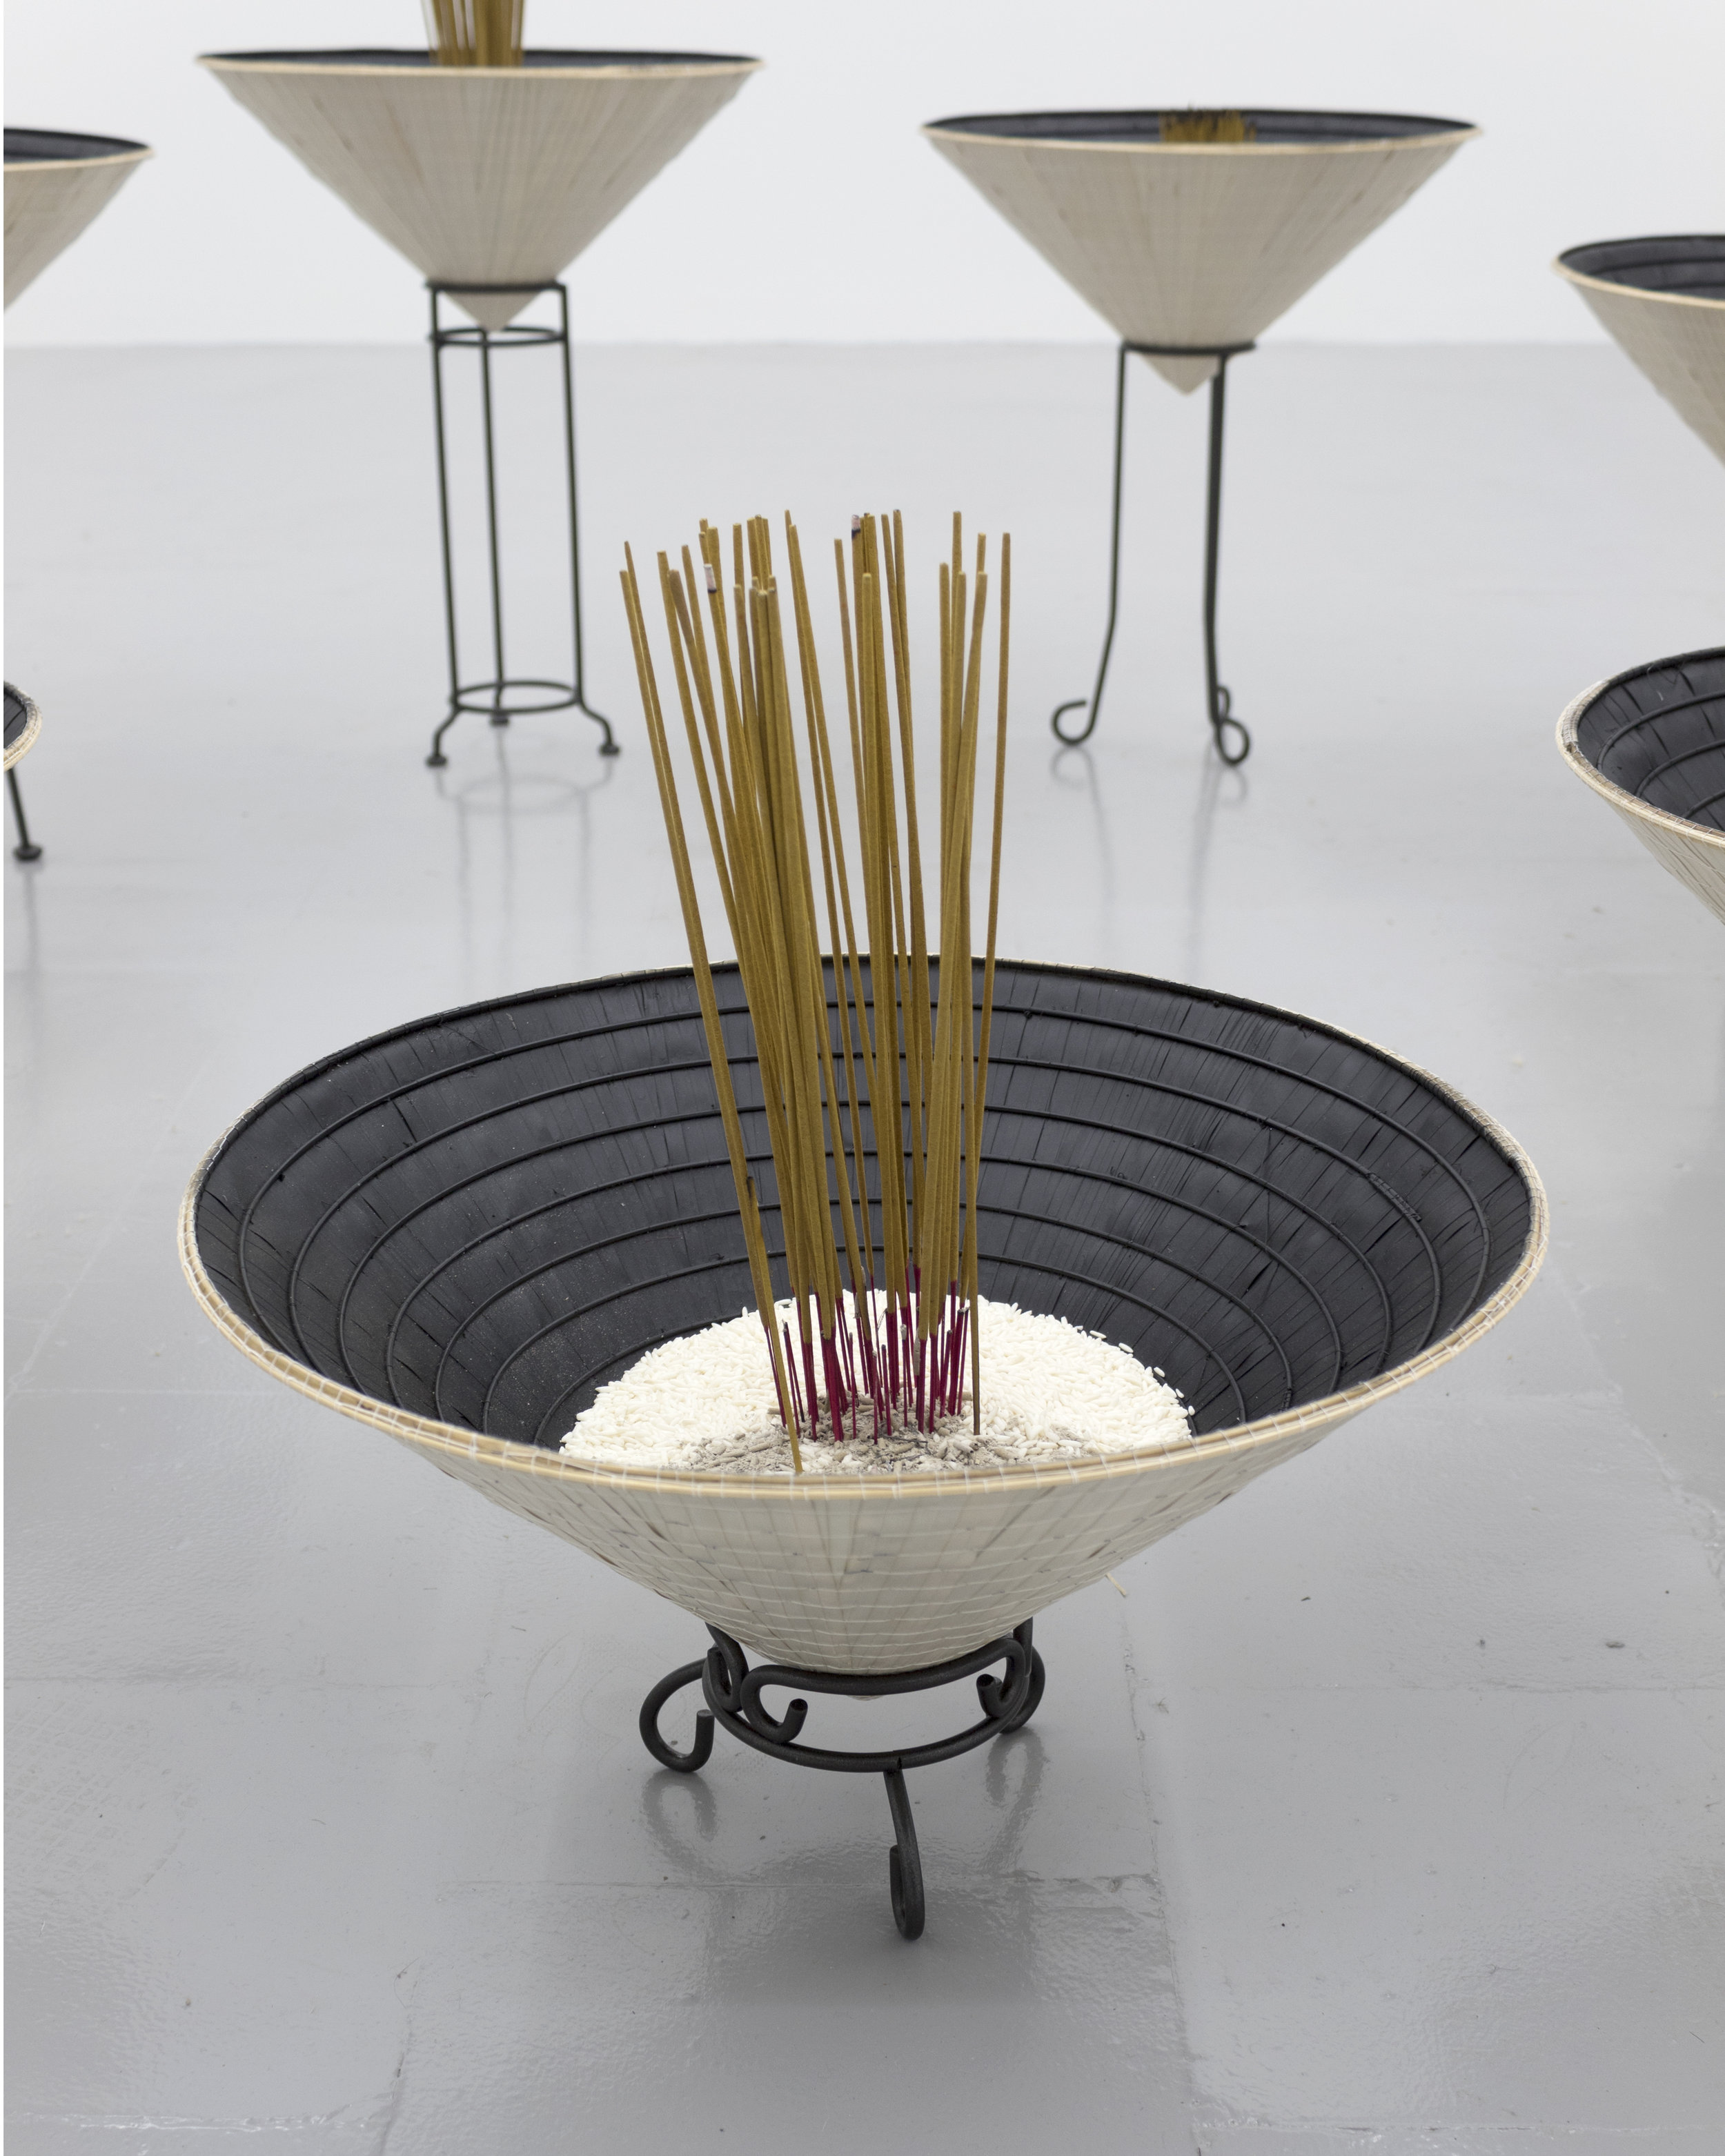  Millian Giang Lien Pham,  Reforge: 9 Phases (One),  2019. Conical hat, sweet rice, incense, metal stand 